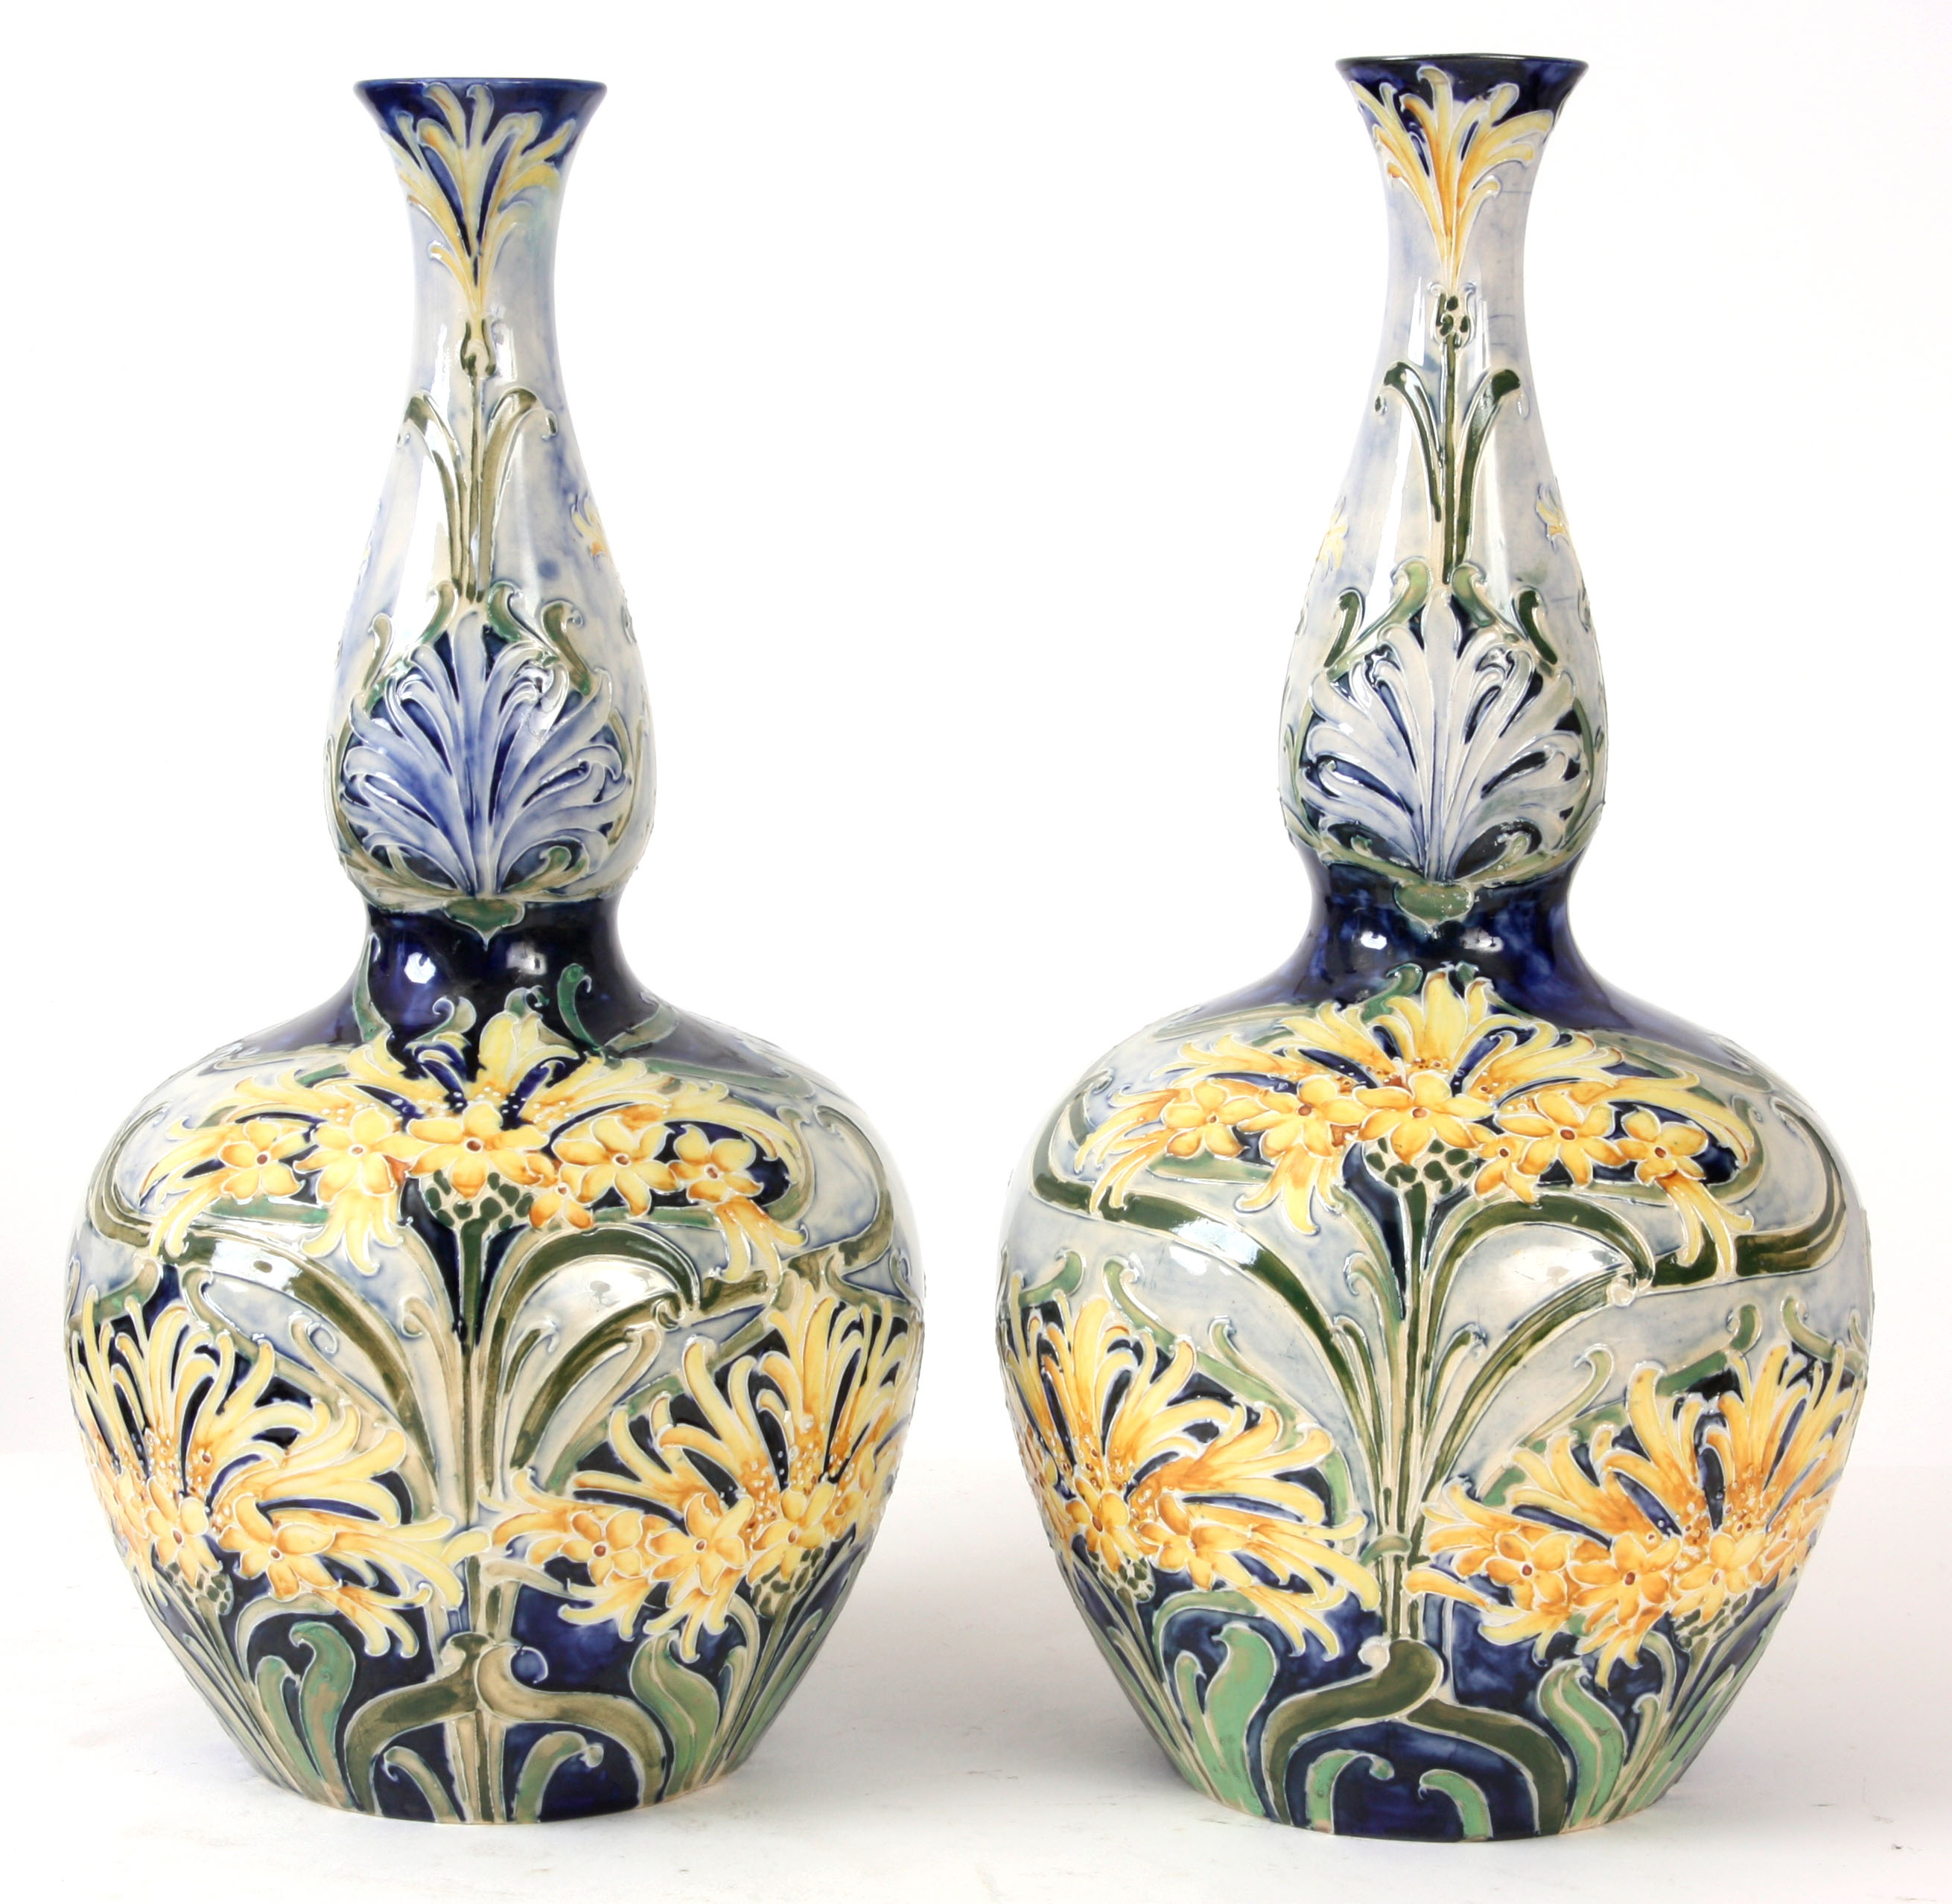 WILLIAM MOORCROFT, A LARGE PAIR OF FLORIAN GROUND MOORCROFT BULBOUS VASES tubeline decorated with